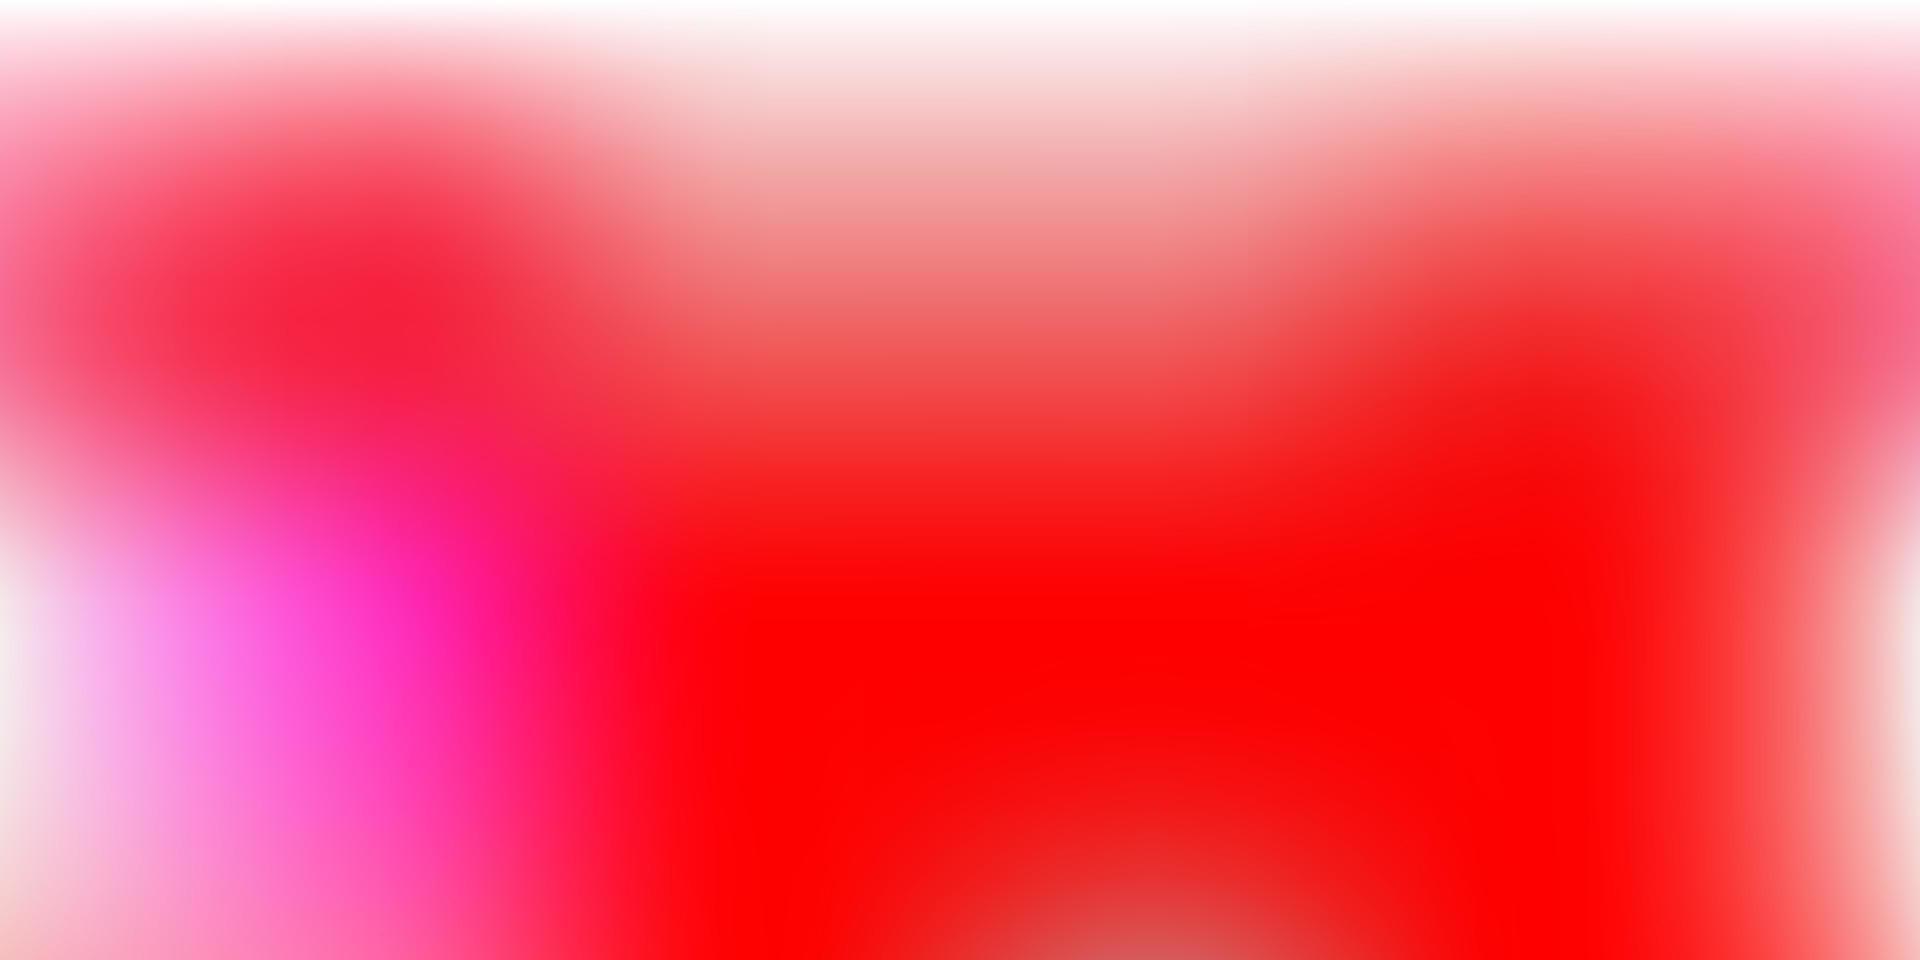 Light Red vector blurred layout.